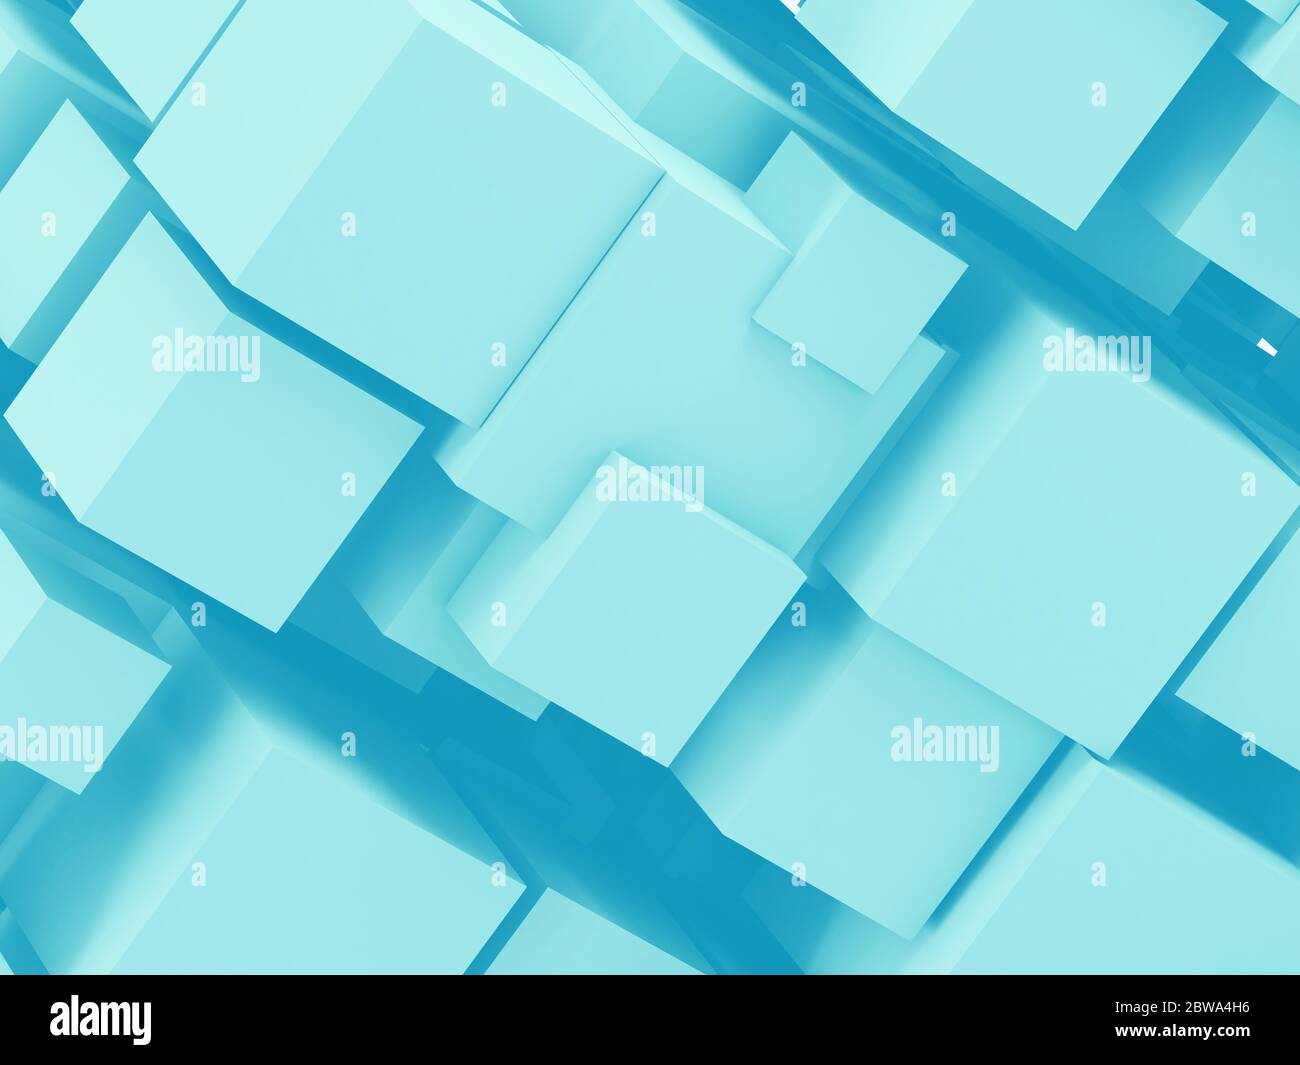 Abstract cgi background with random sized blue cubes. Digital cloudy data storage concept. 3d rendering illustration Stock Photo